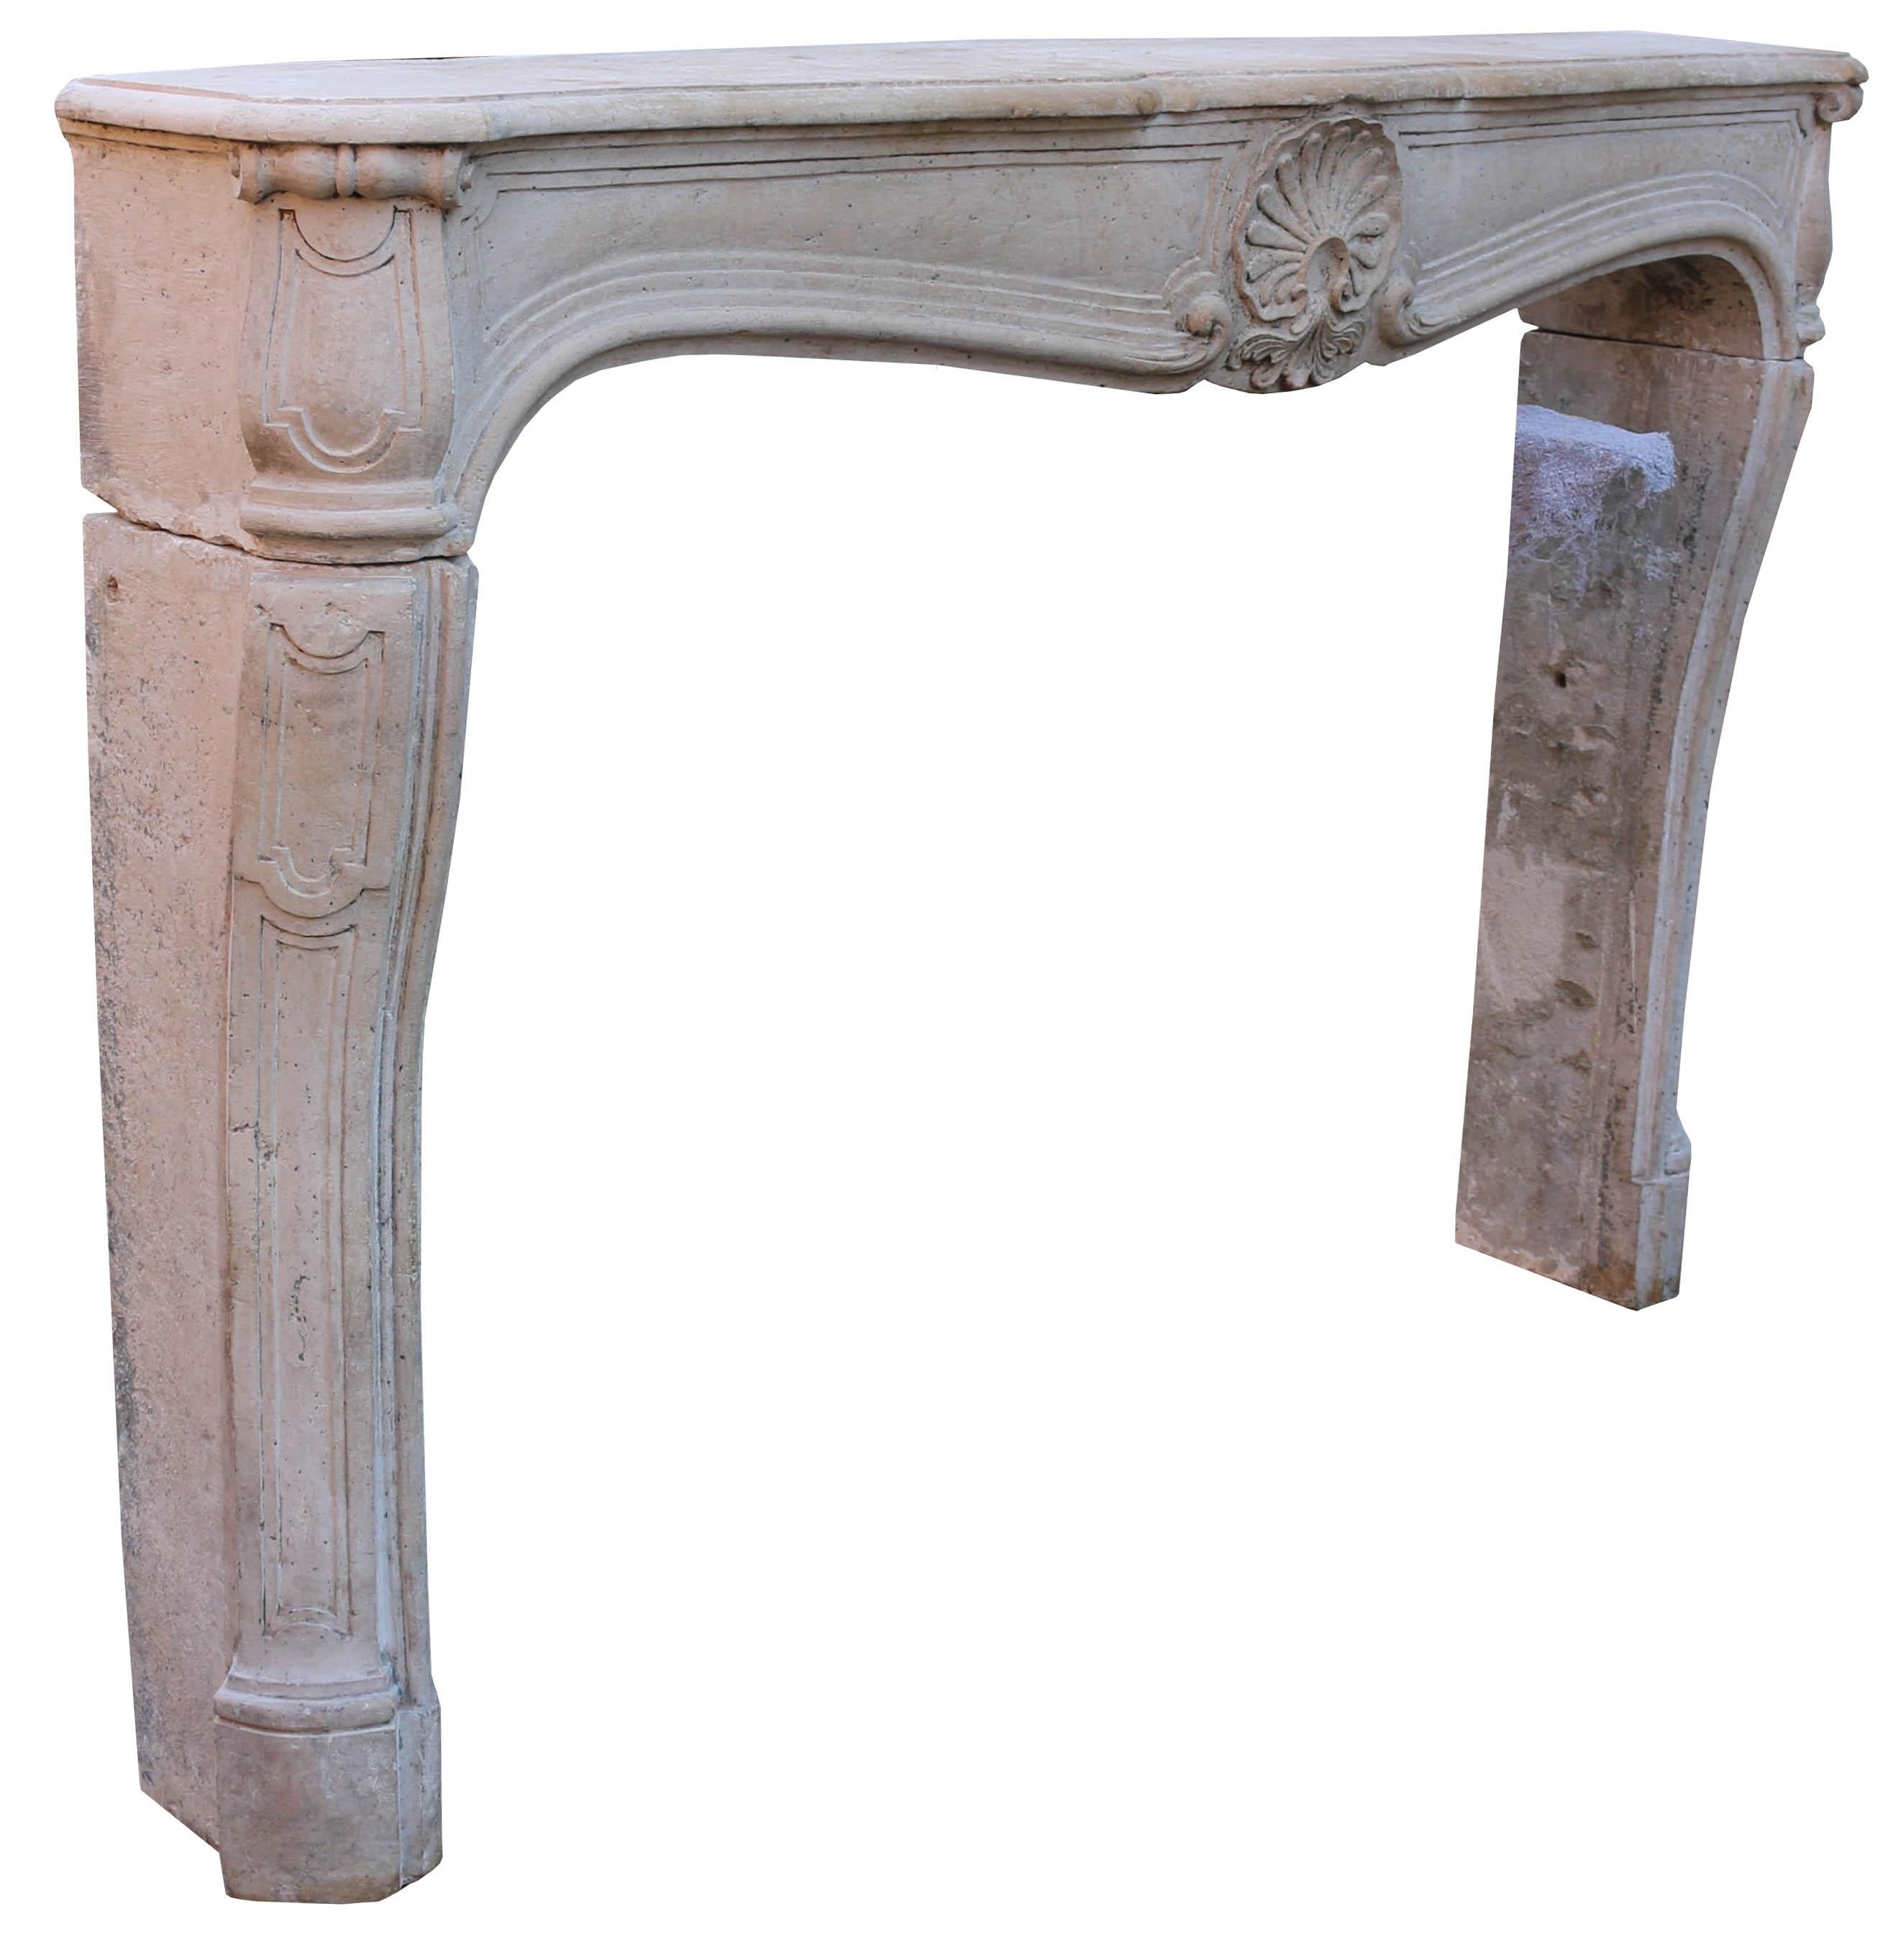 A large French Limestone fireplace surround with panelled jambs and frieze, centred by a shell cartouche.

Additional dimensions

Opening height 102 cm

Opening width 149.5 cm.